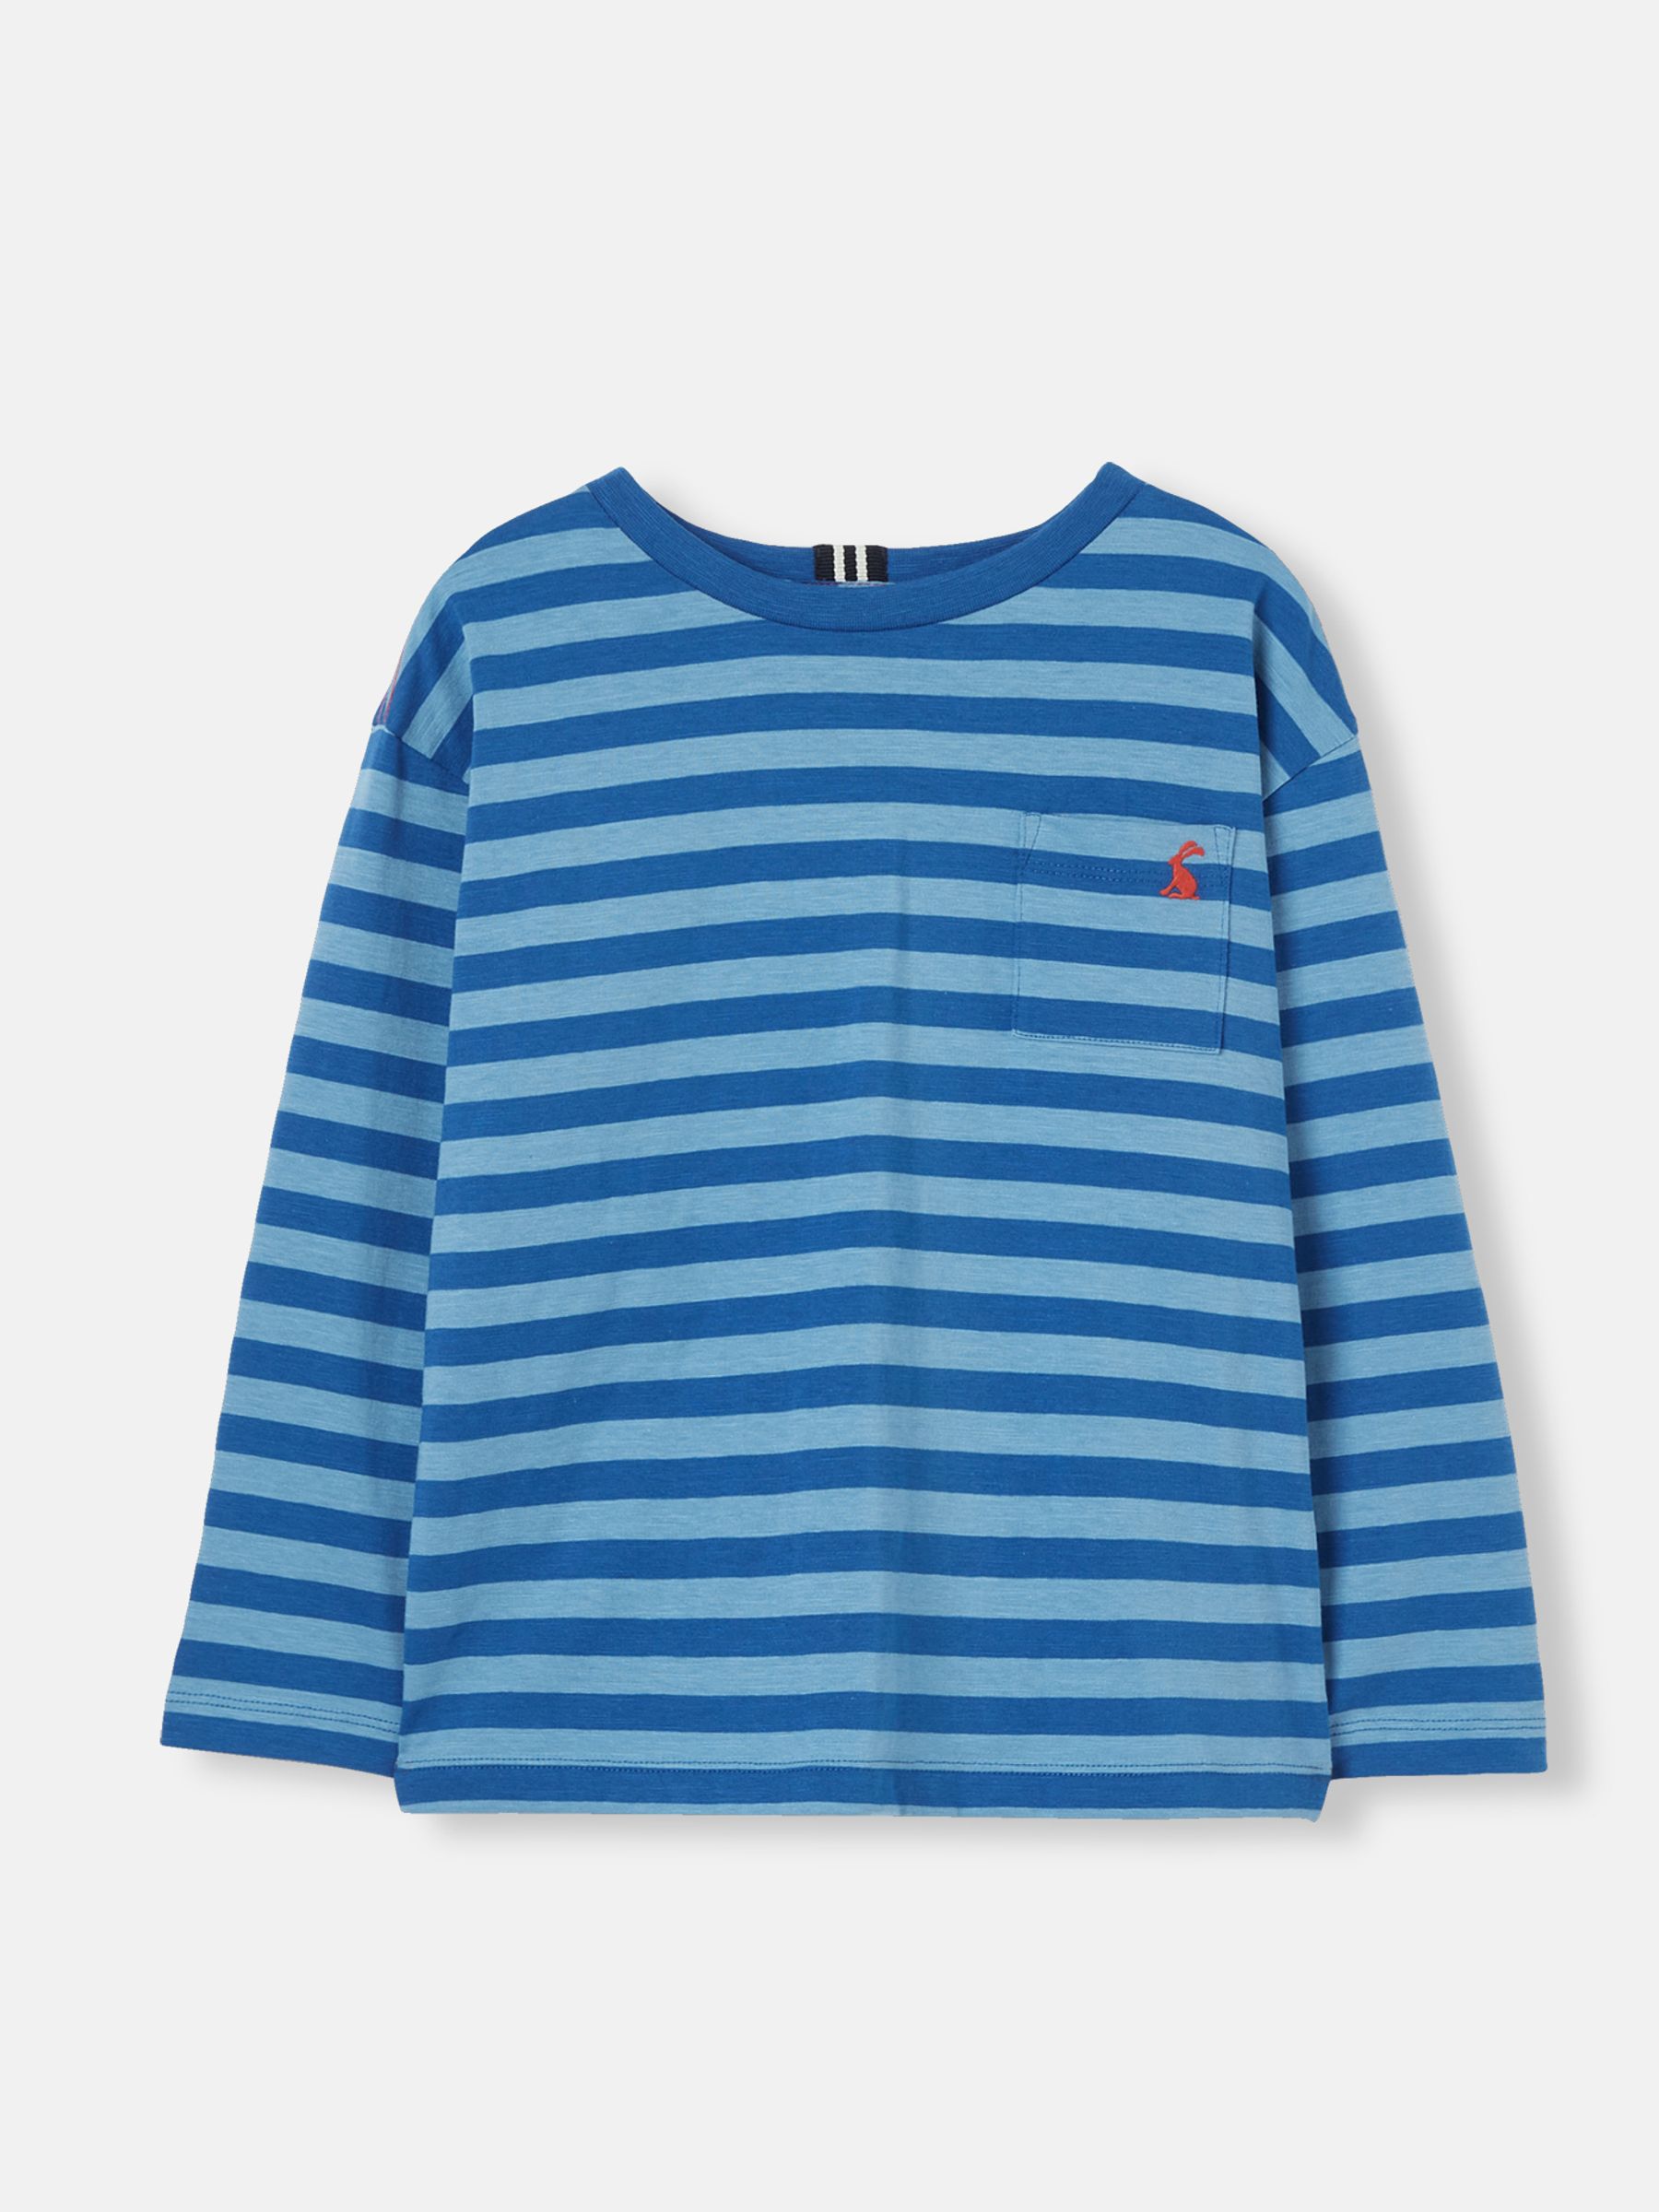 Buy Joules Laundered Long Sleeve Jersey T-Shirt from the Joules online shop